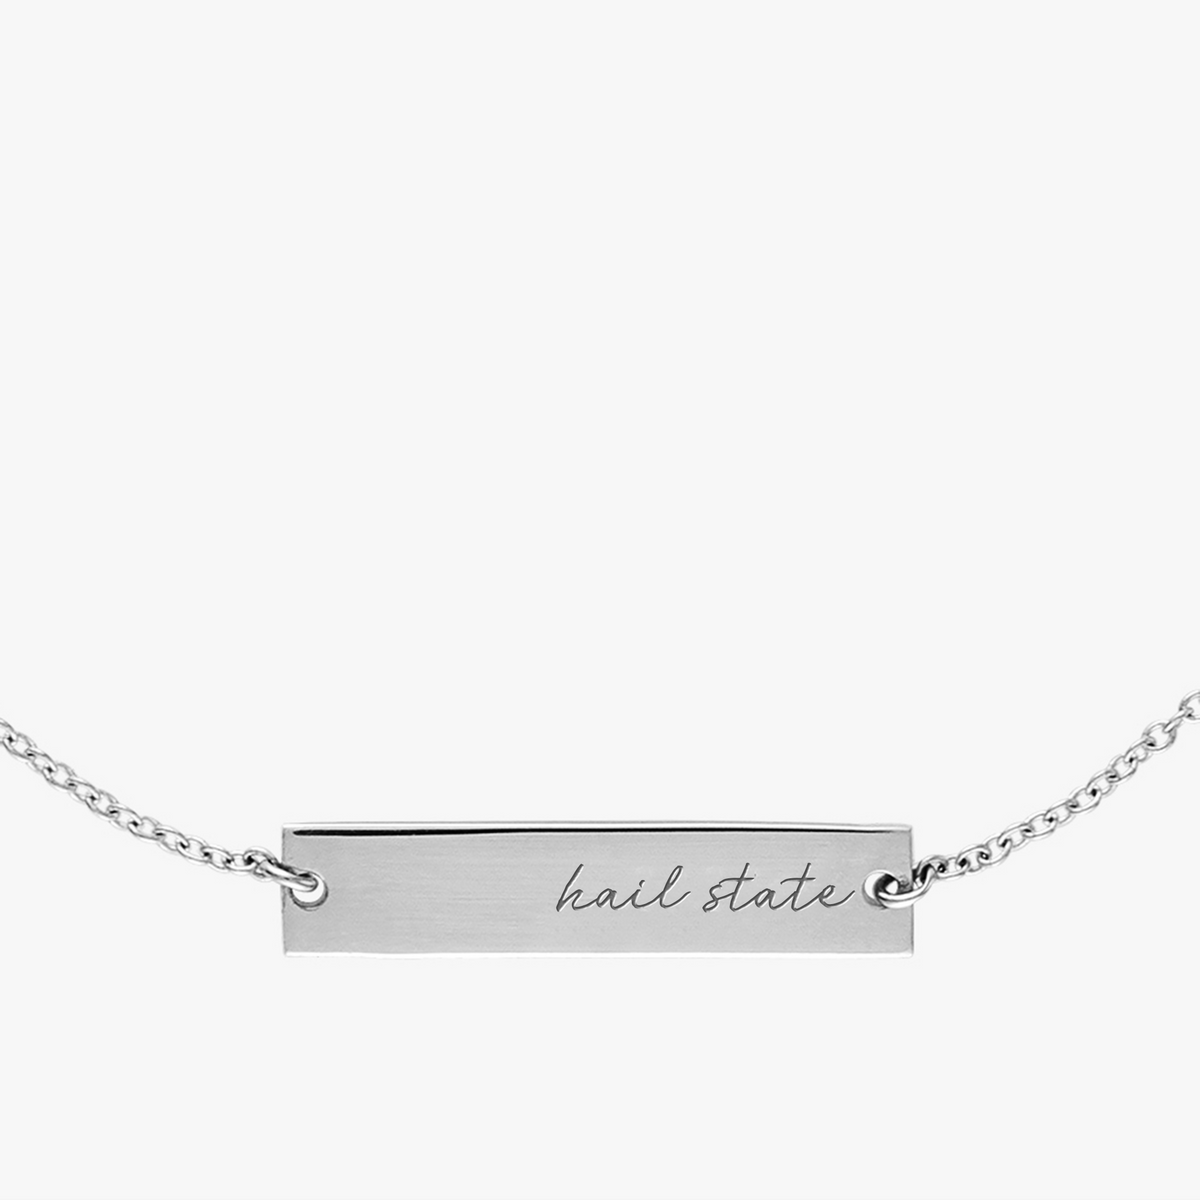 Mississippi State Horizontal Necklace Sterling Silver Close Up